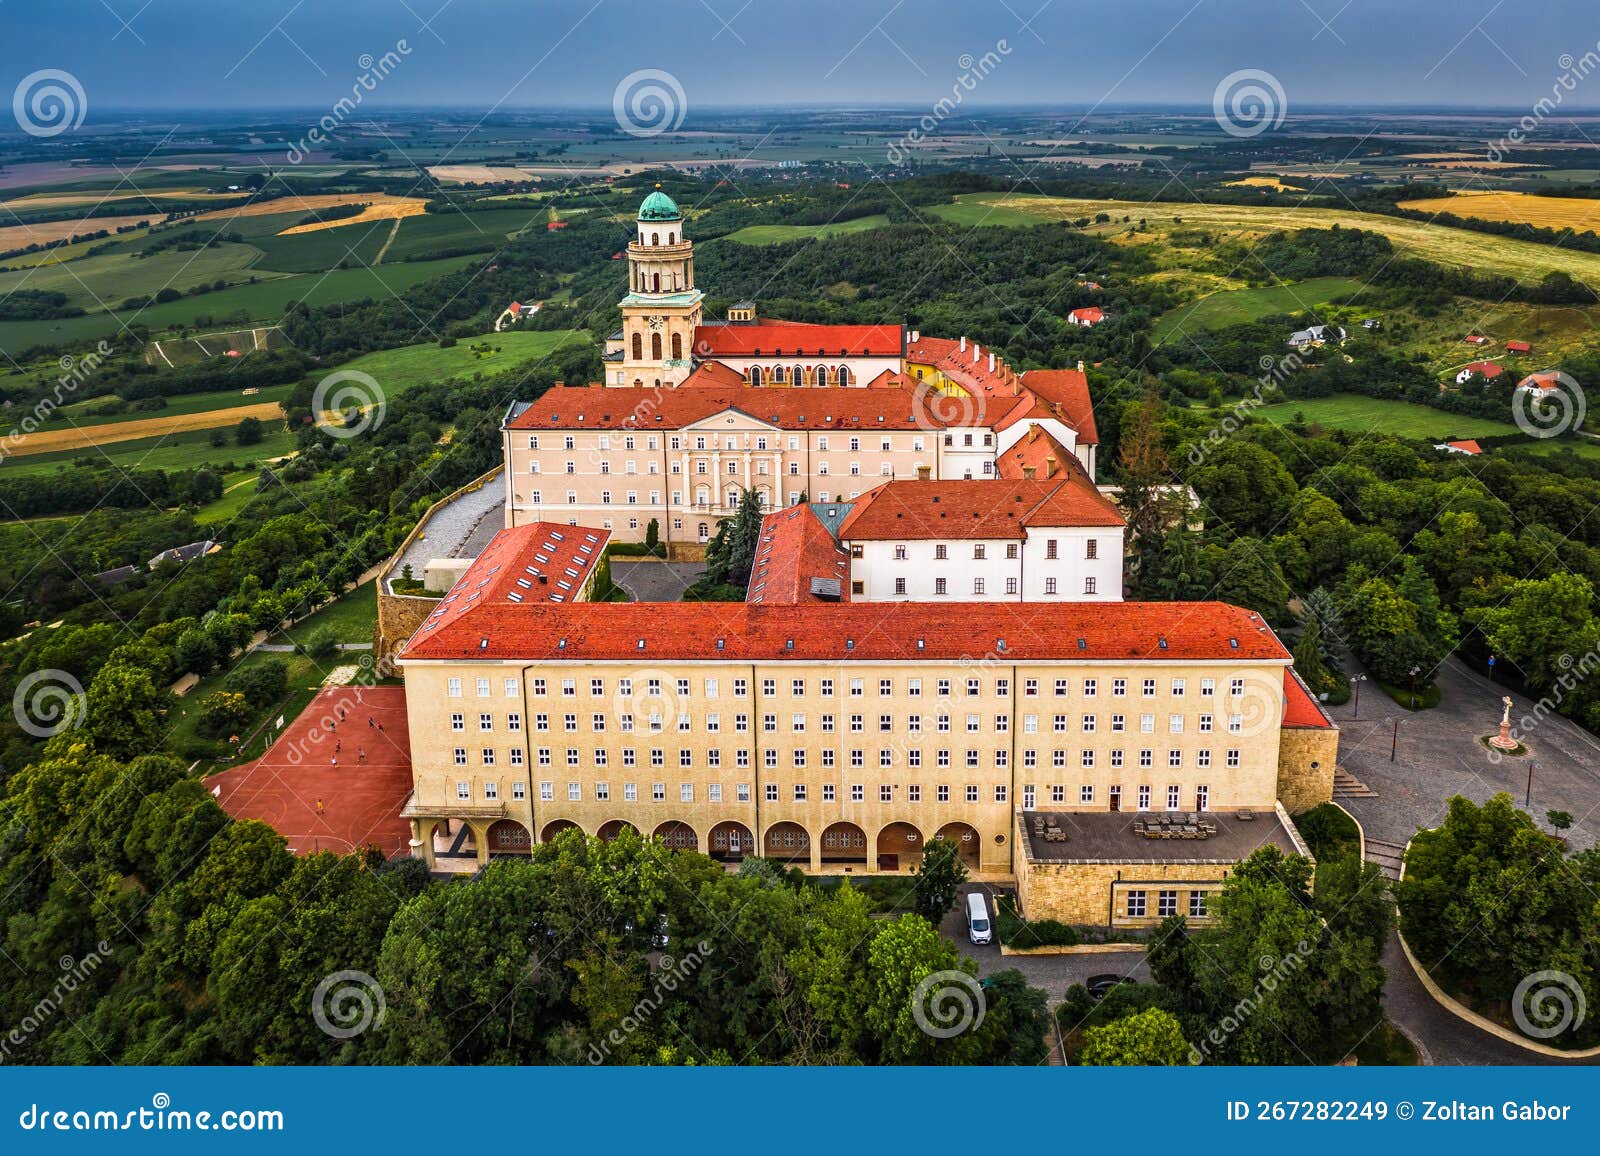 pannonhalma, hungary - aerial view of the beautiful millenary benedictine abbey of pannonhalma pannonhalmi apatsag with blue sky